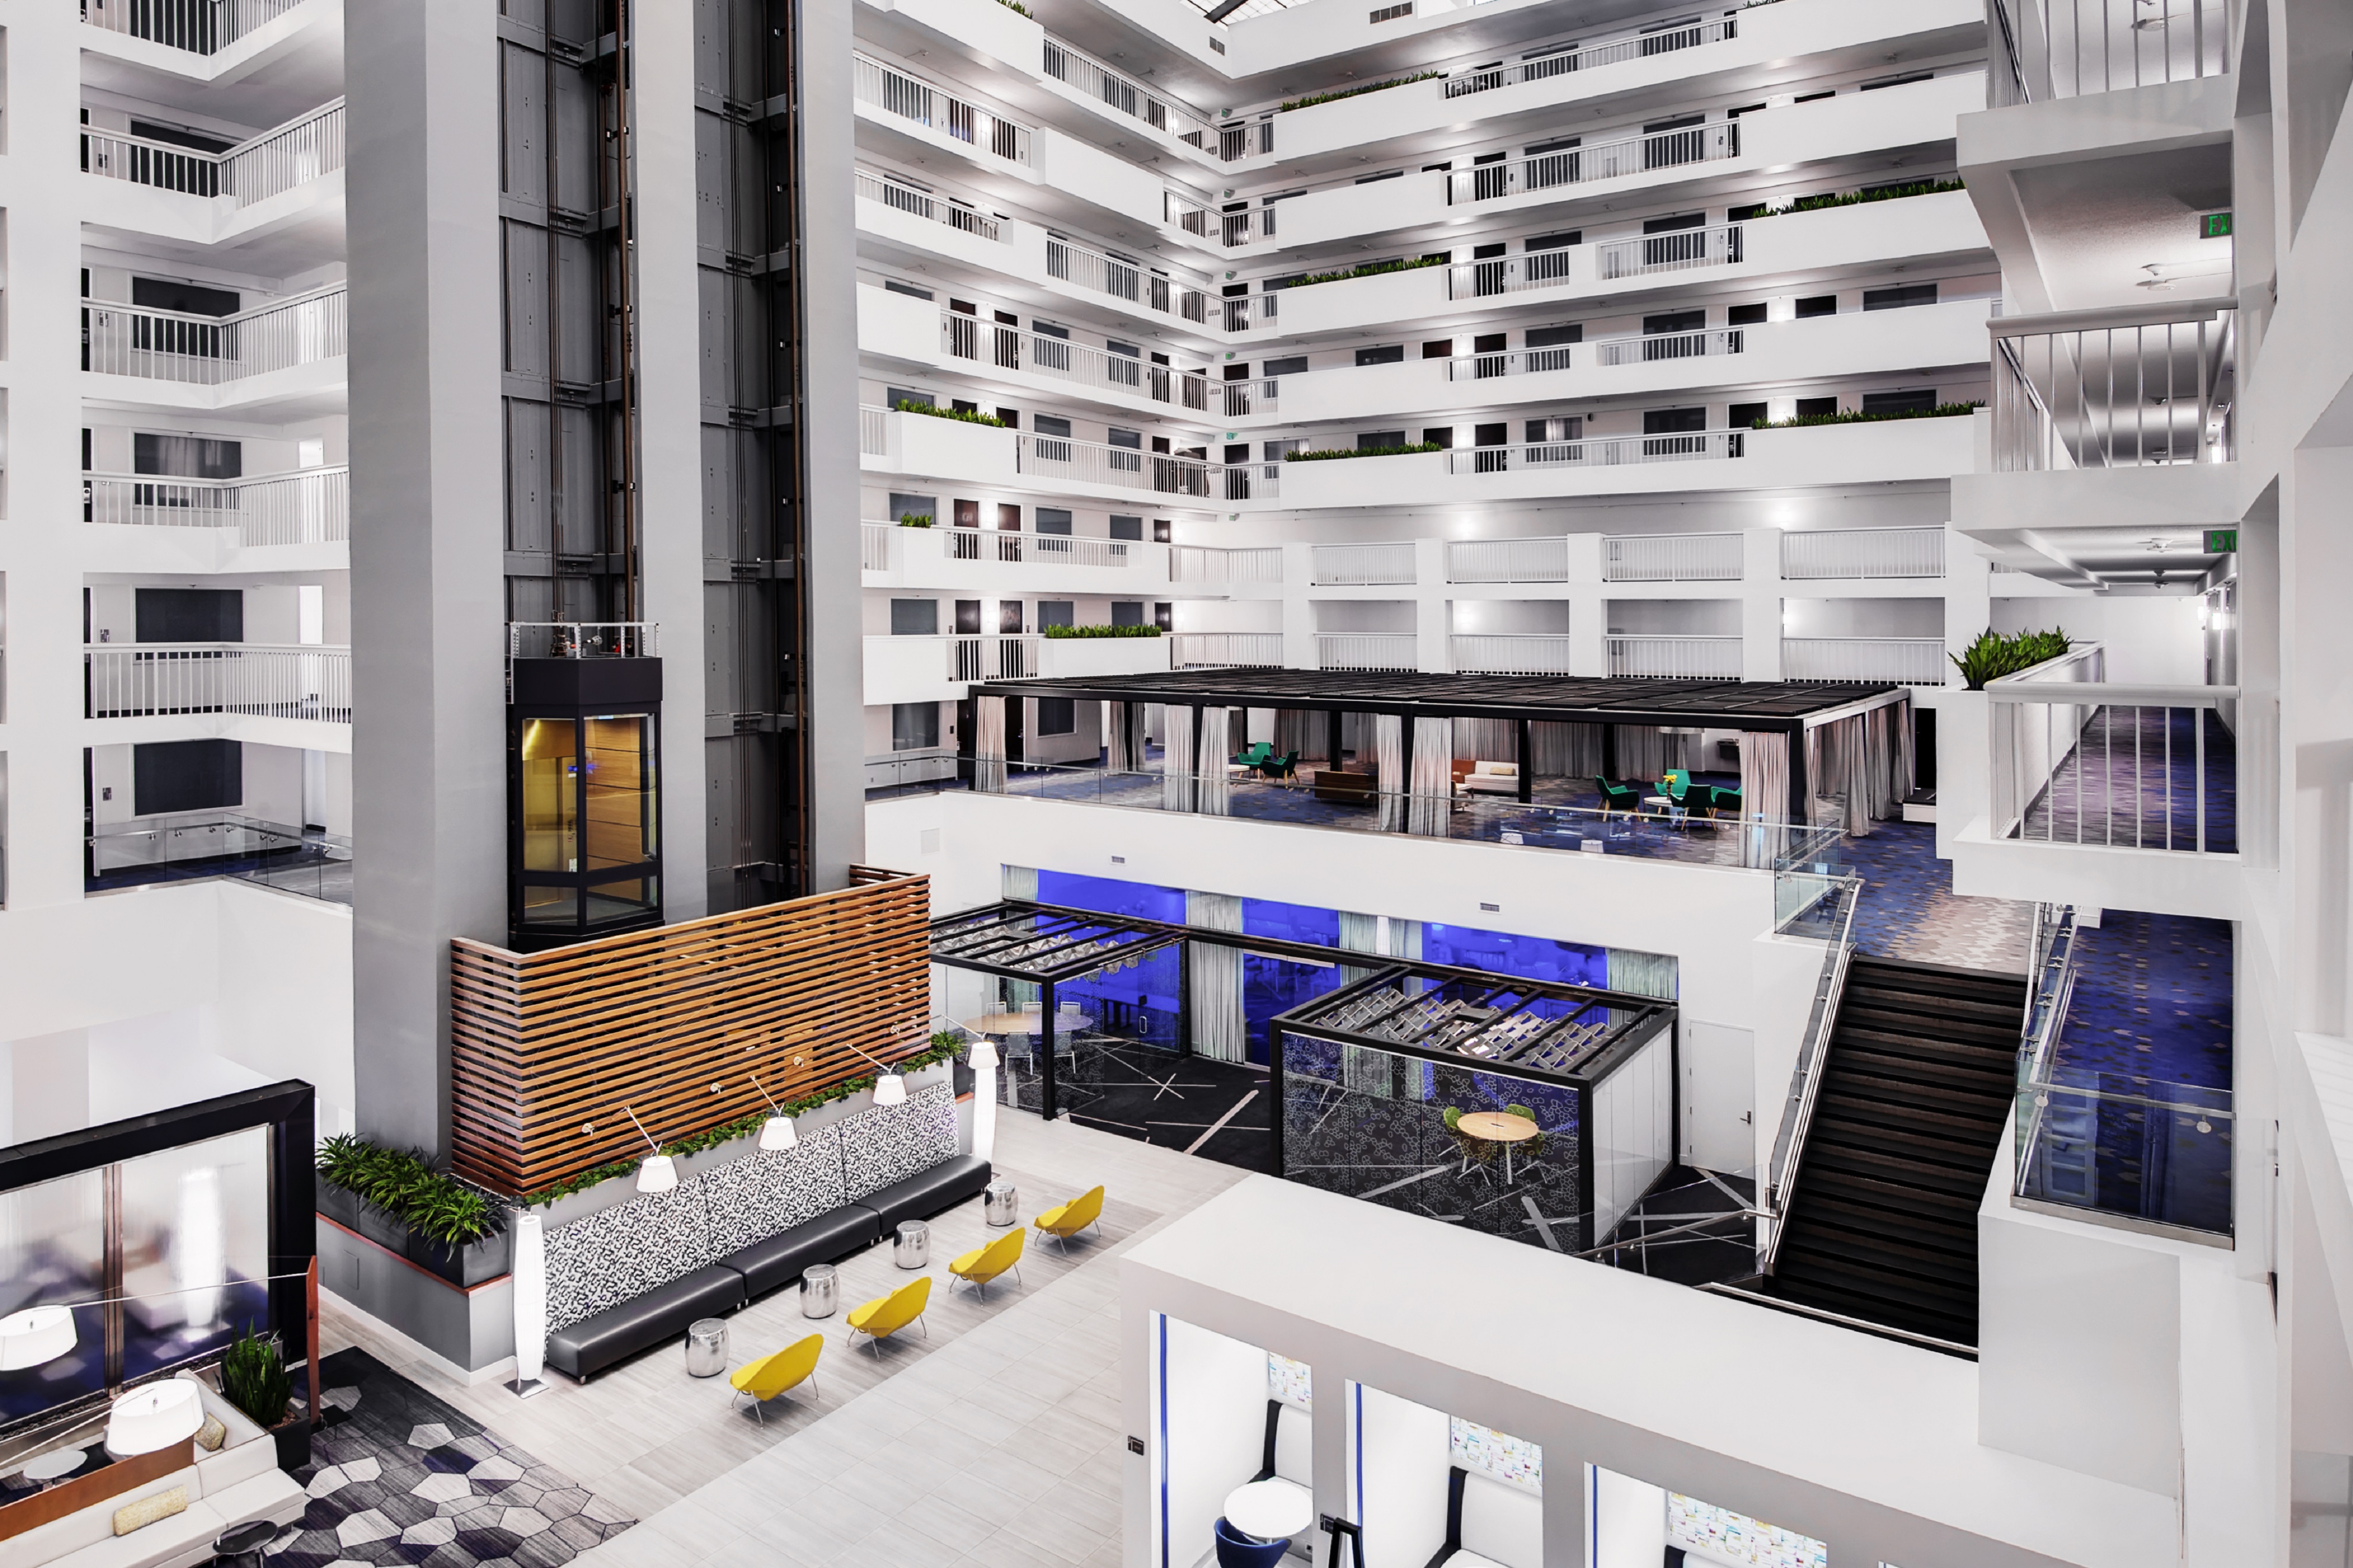 View of Atrium Showing Seating Area, Elevator, Stairs, and Guest Room Balconies